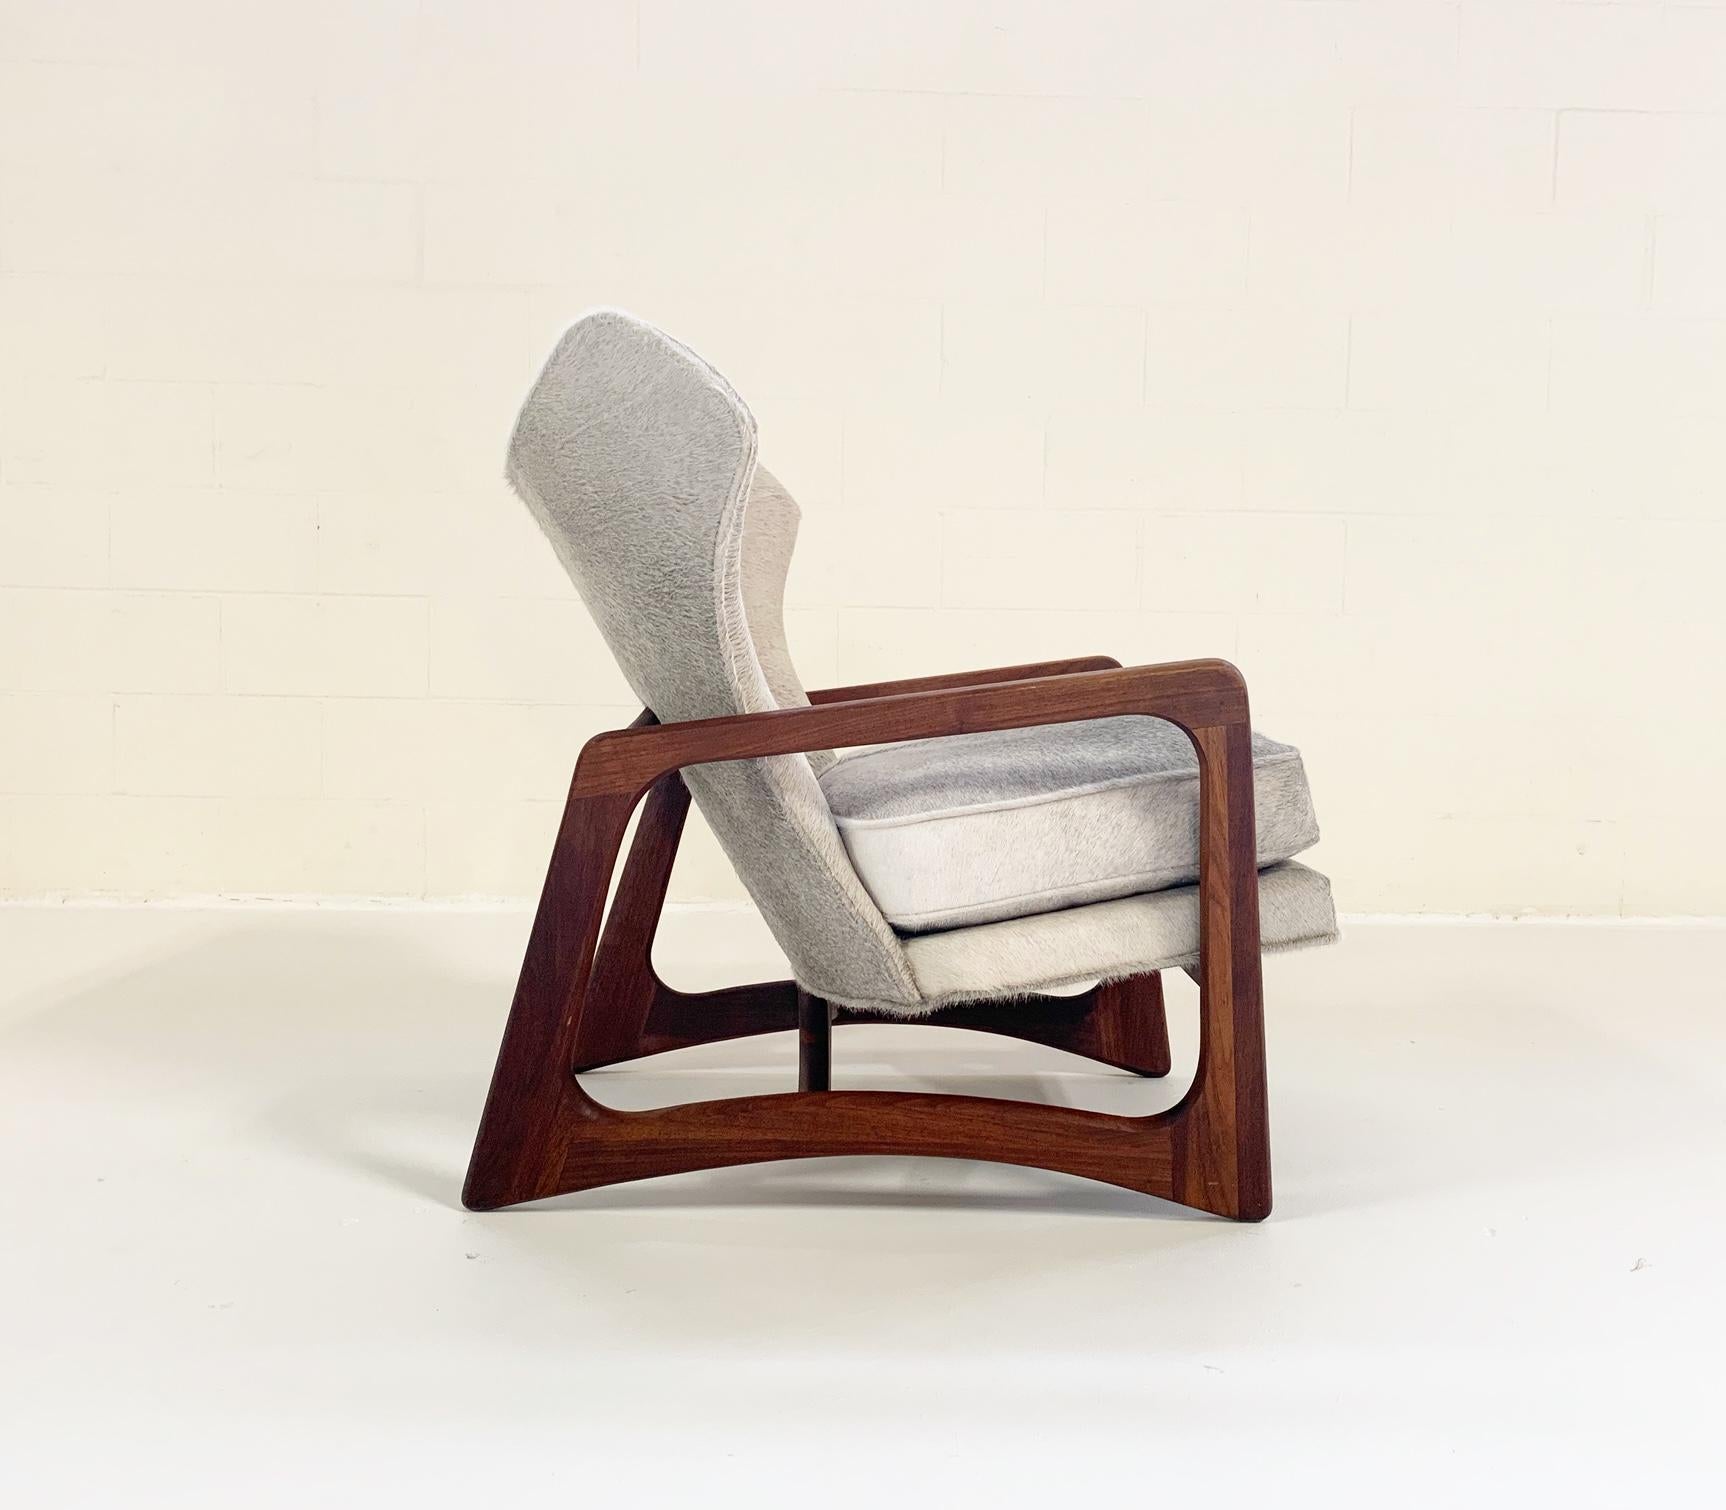 Adrian Pearsall for Craft Associates Model 2466-C Lounge Chair Restored in Brazilian Cowhide

This c. 1960s Pearsall lounge chair features a gorgeously grained and sculpted biomorphic walnut frame, a quintessential characteristic of legendary, hall